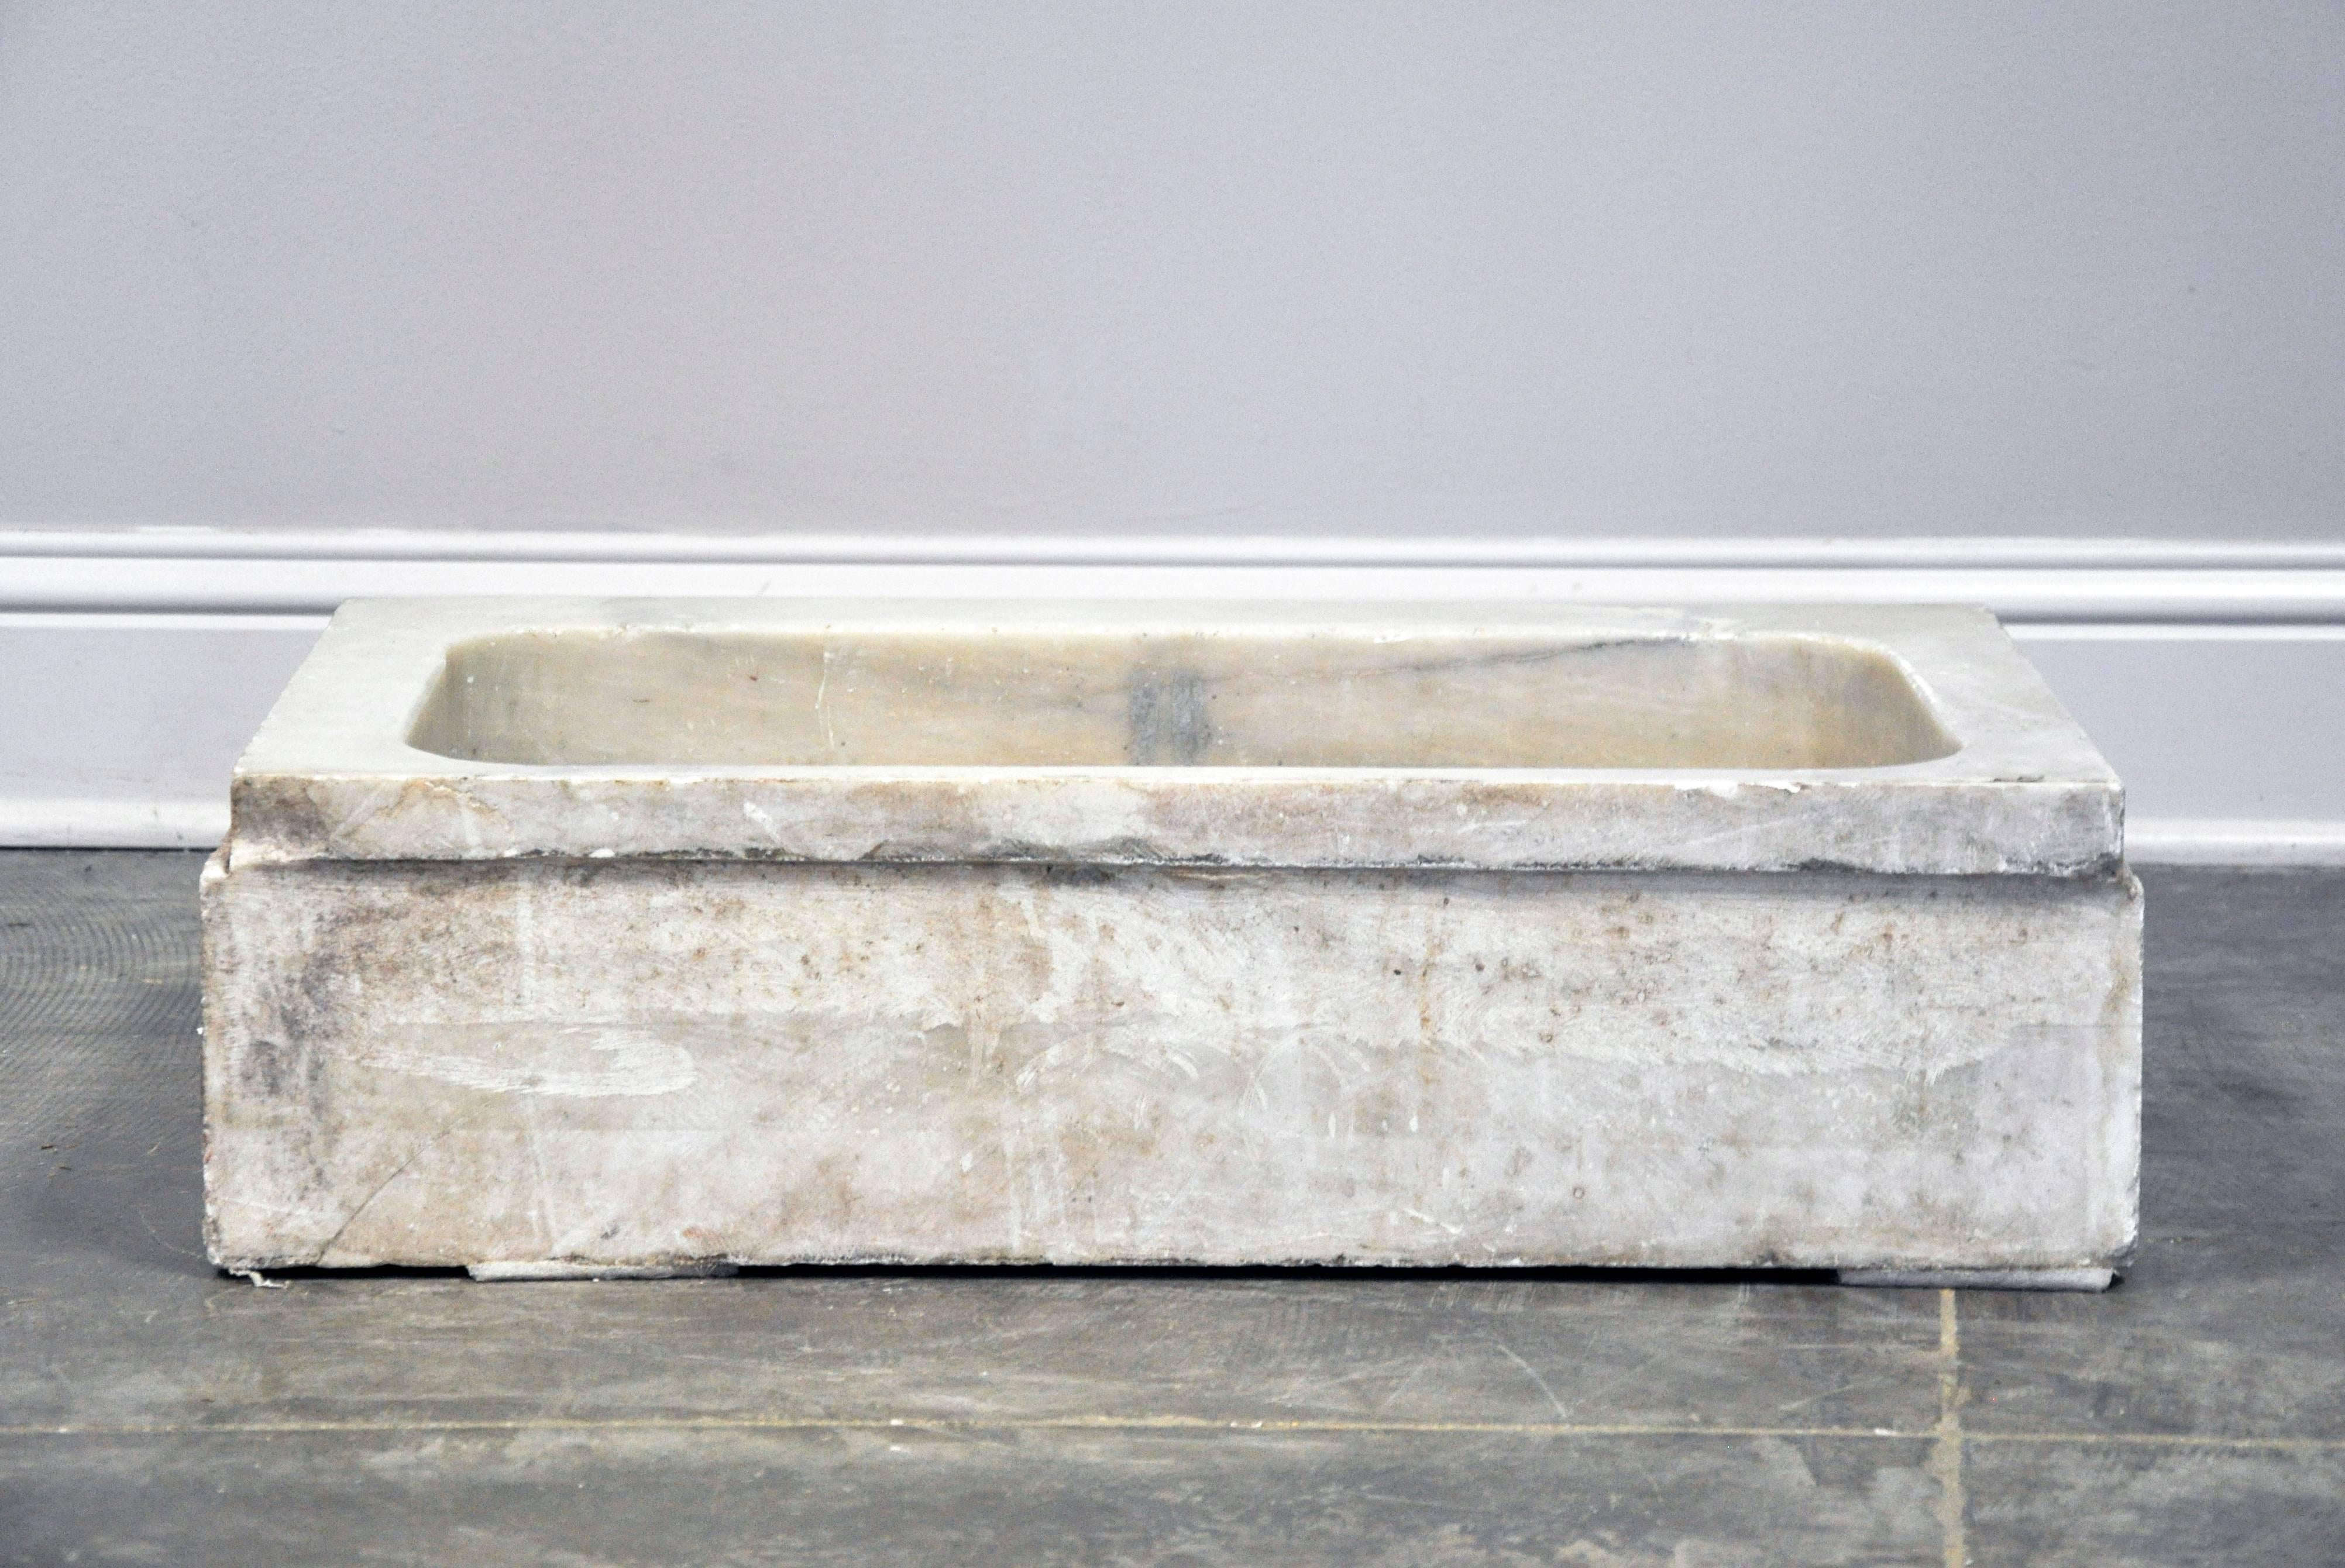 Fabulous vintage sink basin in white marble. Four smooth edges and carved front ledge with beautiful grey veining. Estimated 1920s-1930s when running water became prevalent in homes. Includes pre-cut hole for drainage fixture. Inside measurements